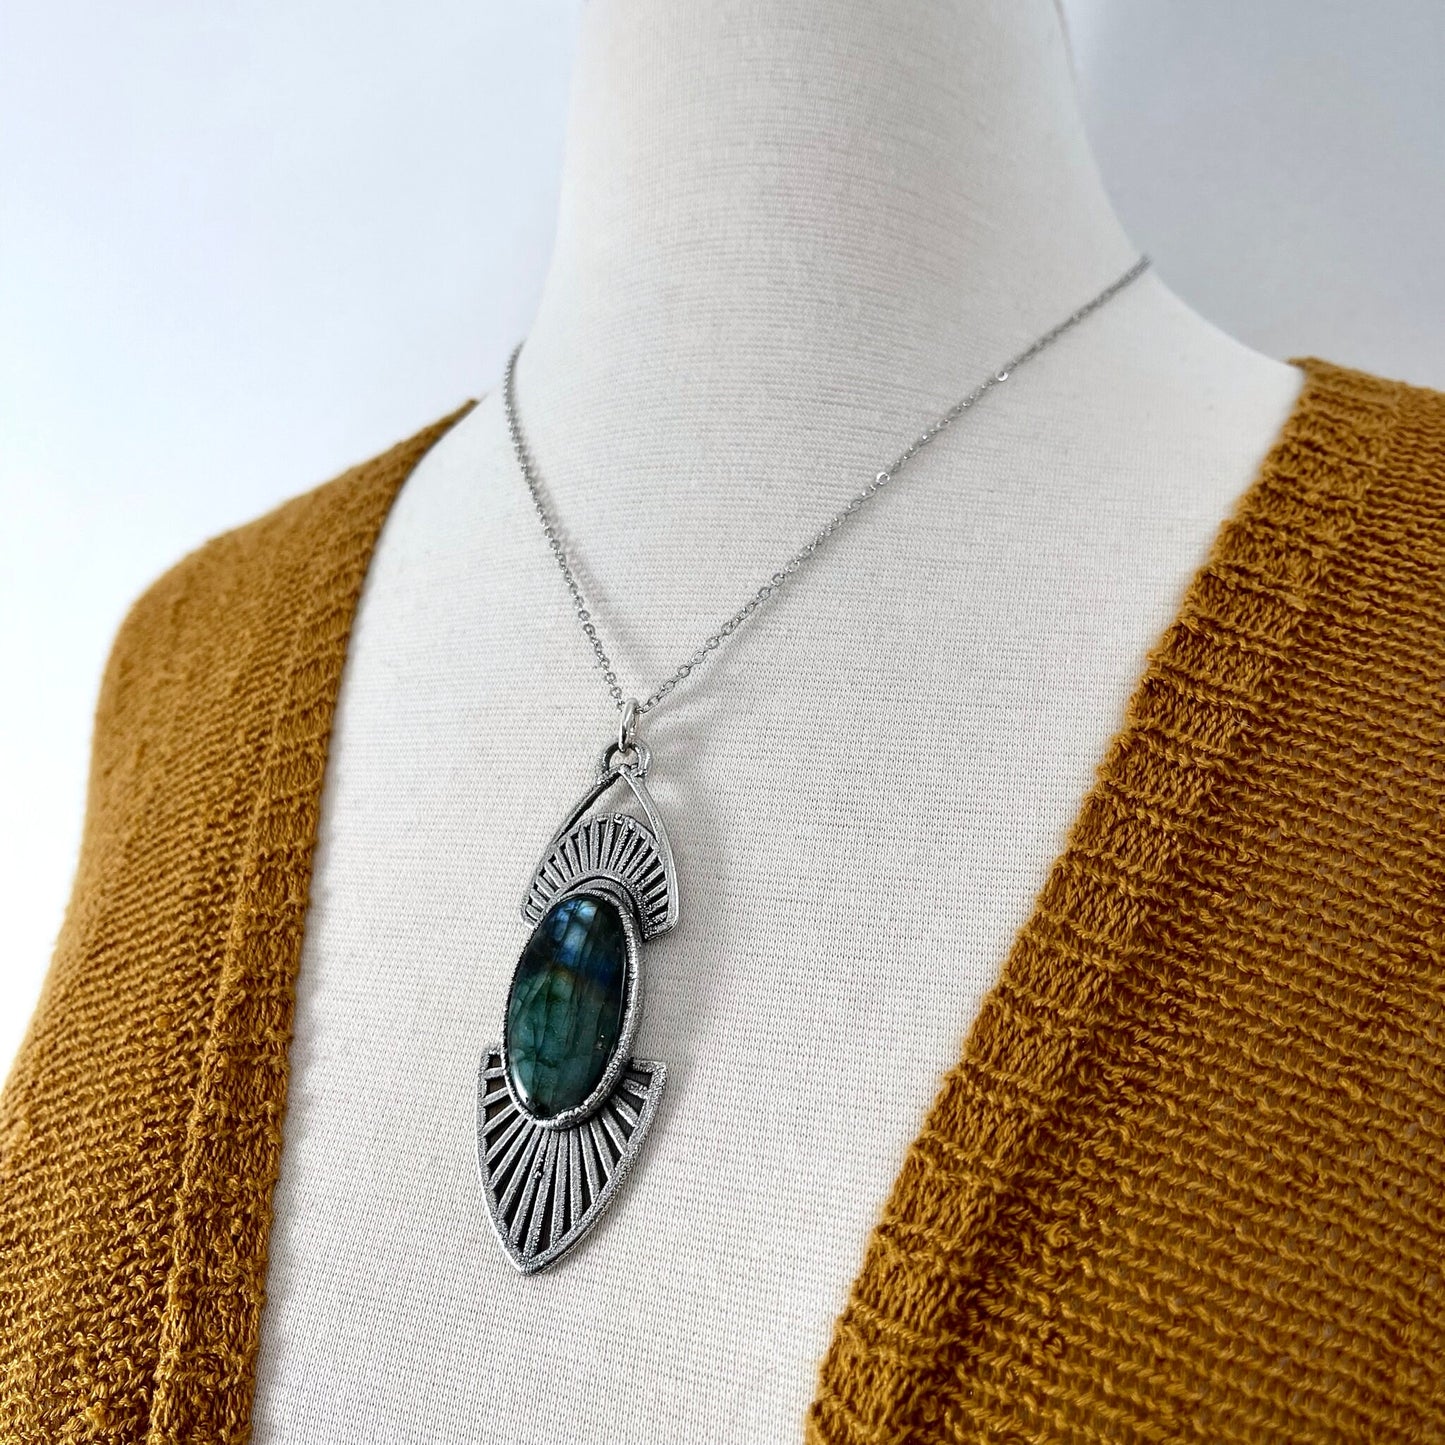 Crystal Necklace - Moss & Moon Collection - Labradorite set in Fine Silver / One of a Kind - by Foxlark / Witchy Necklace Goth Jewelry